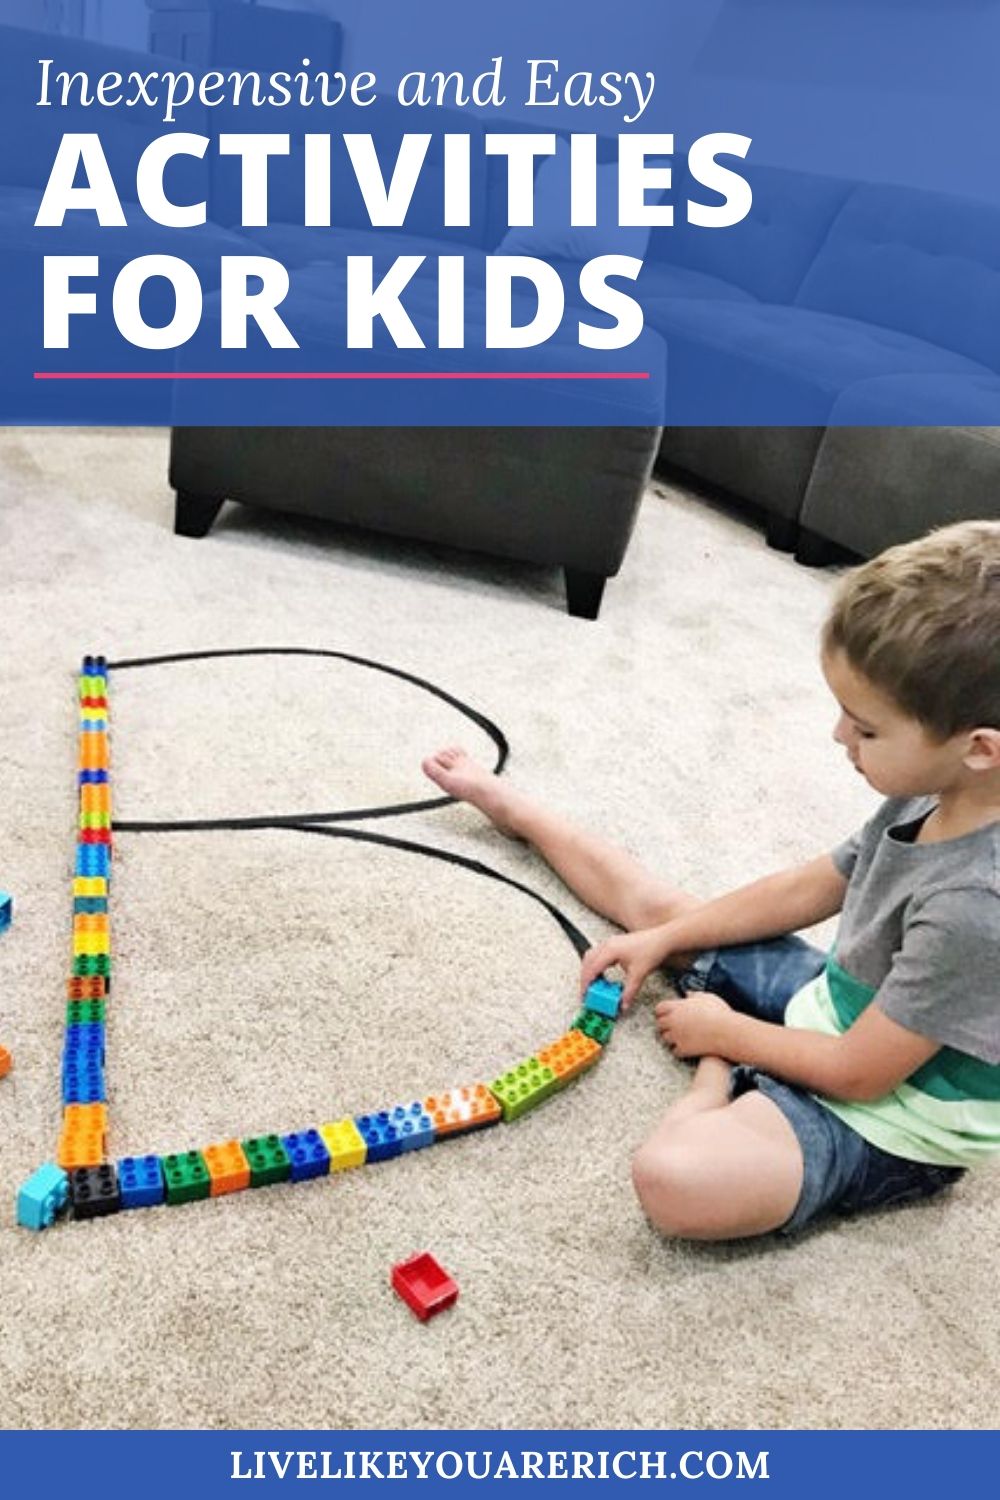 Inexpensive and Easy Activities for Kids. Are you looking for inexpensive and easy activities that will keep your kids entertained? Here are activities that are inexpensive yet entertain your child for hours. #activitiesforkids #activities